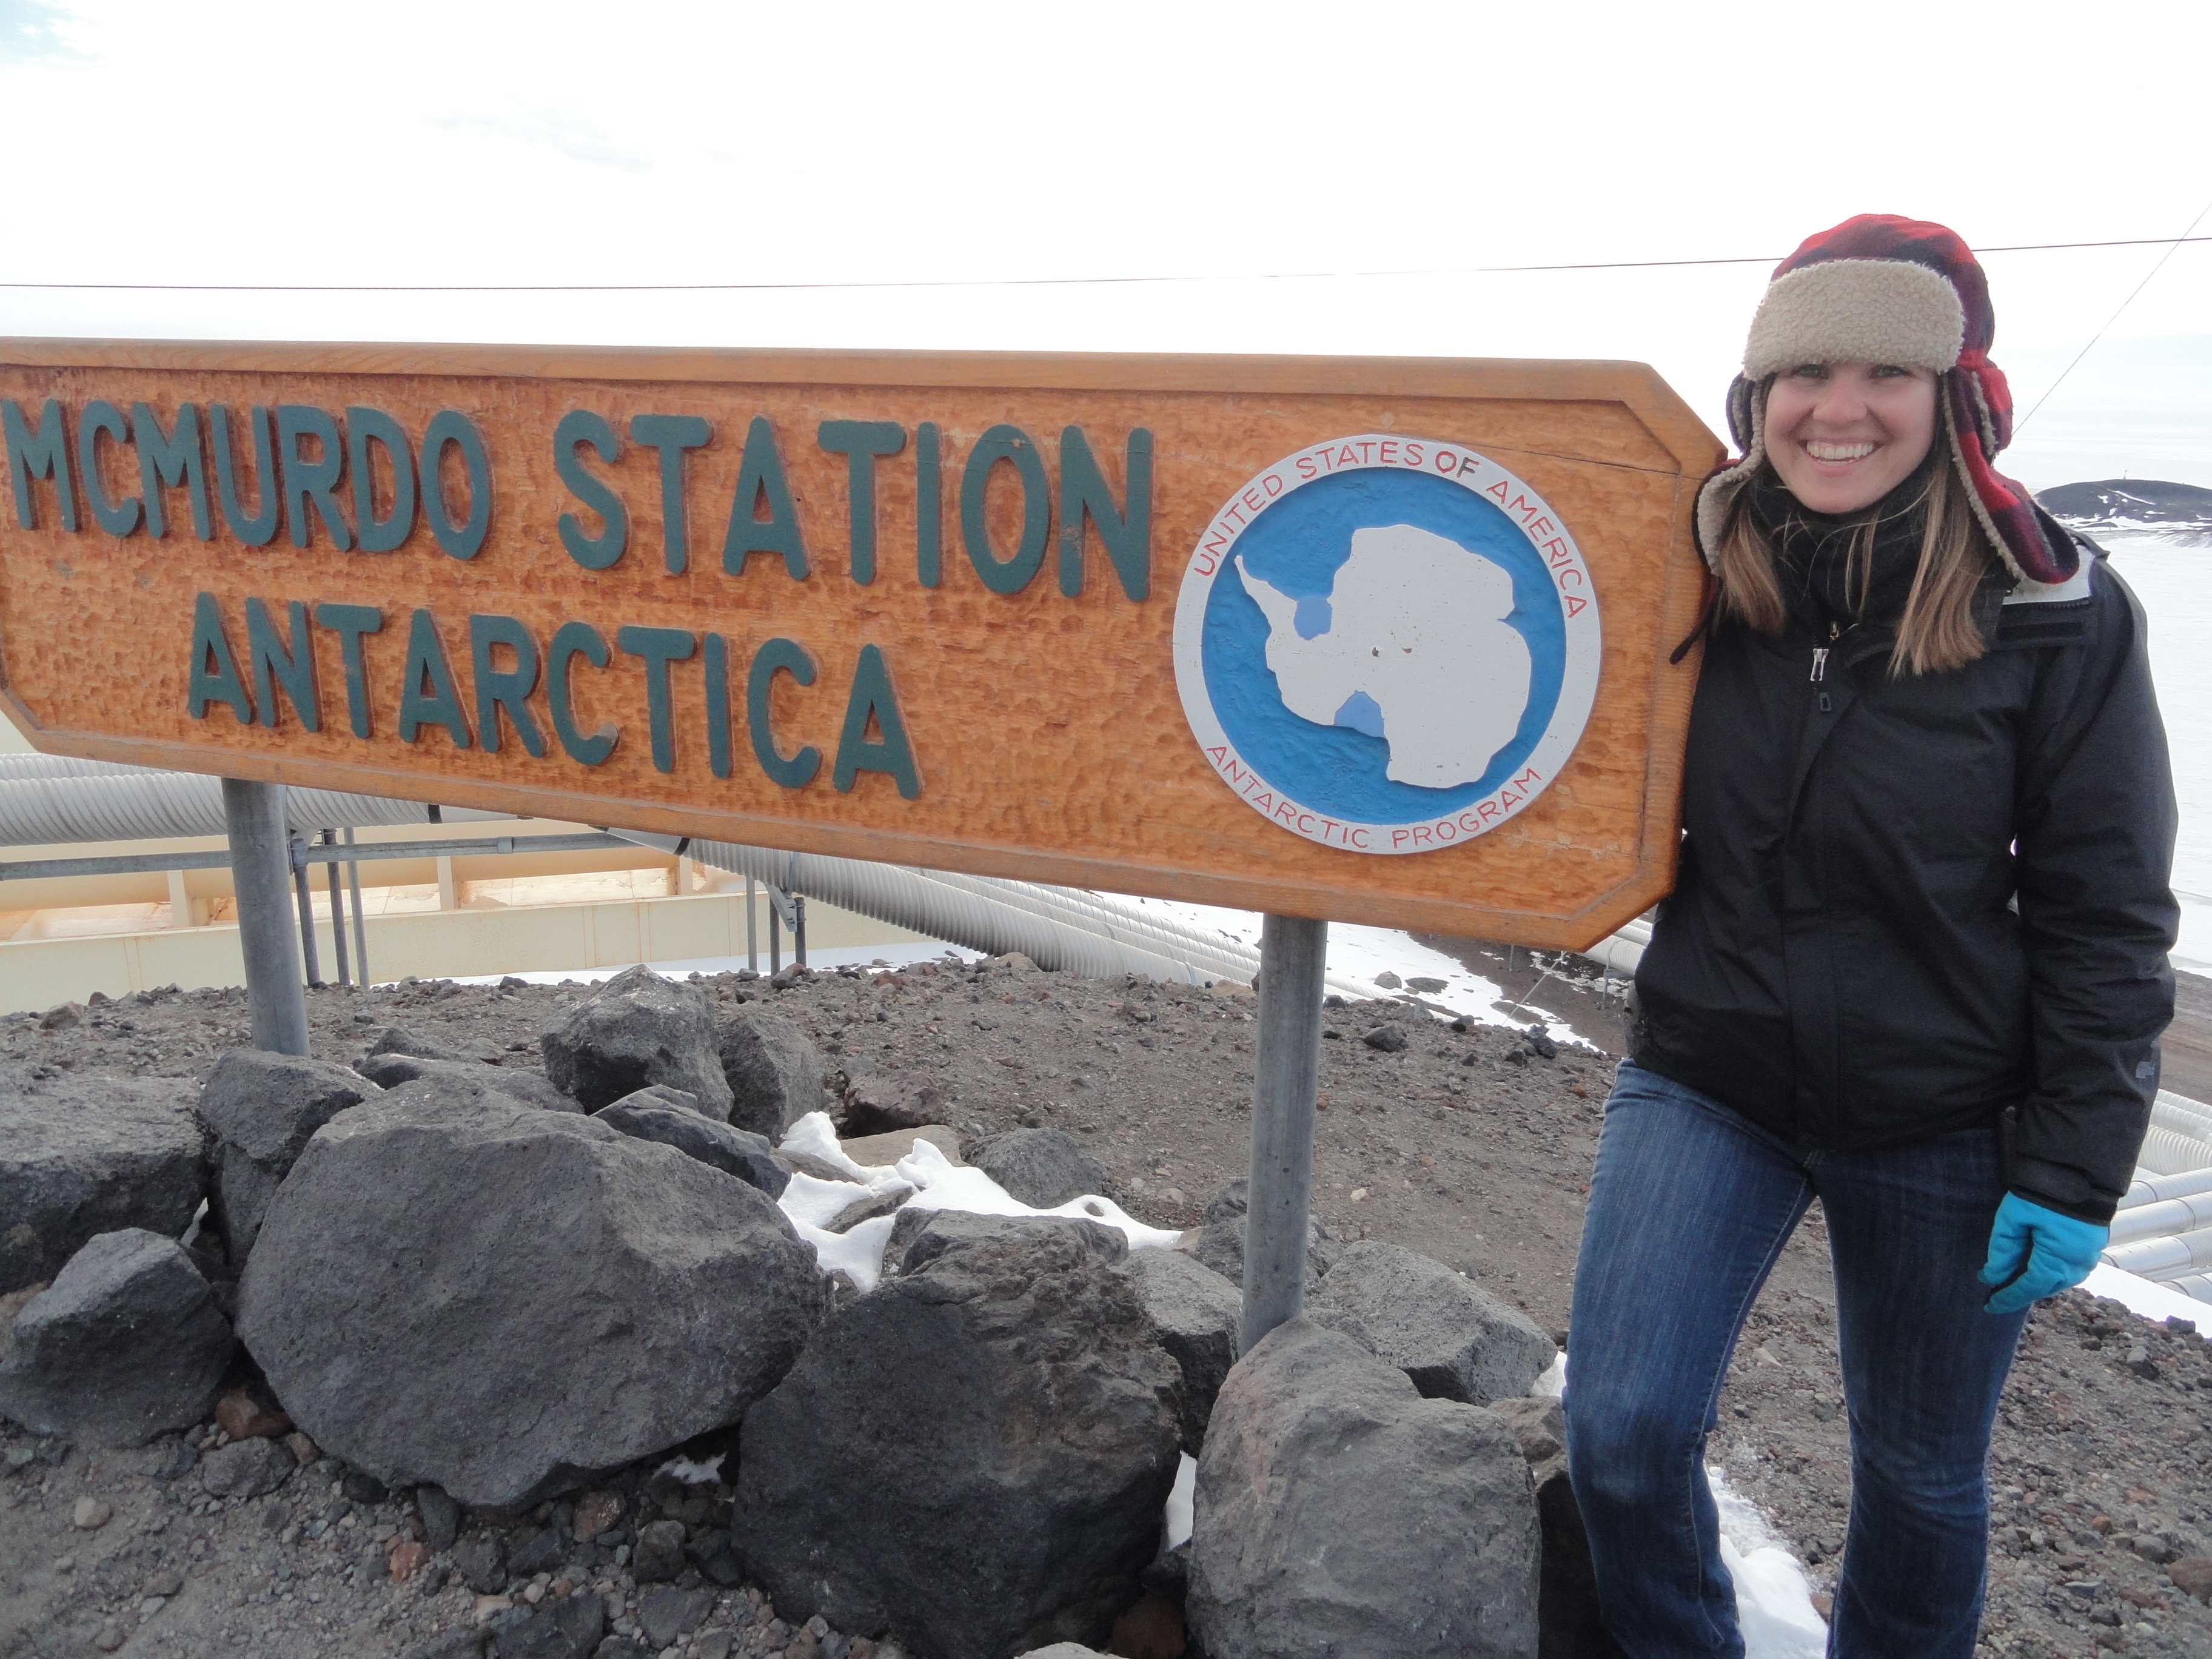 Gail Muldoon next to McMurdo Station in Antarctica